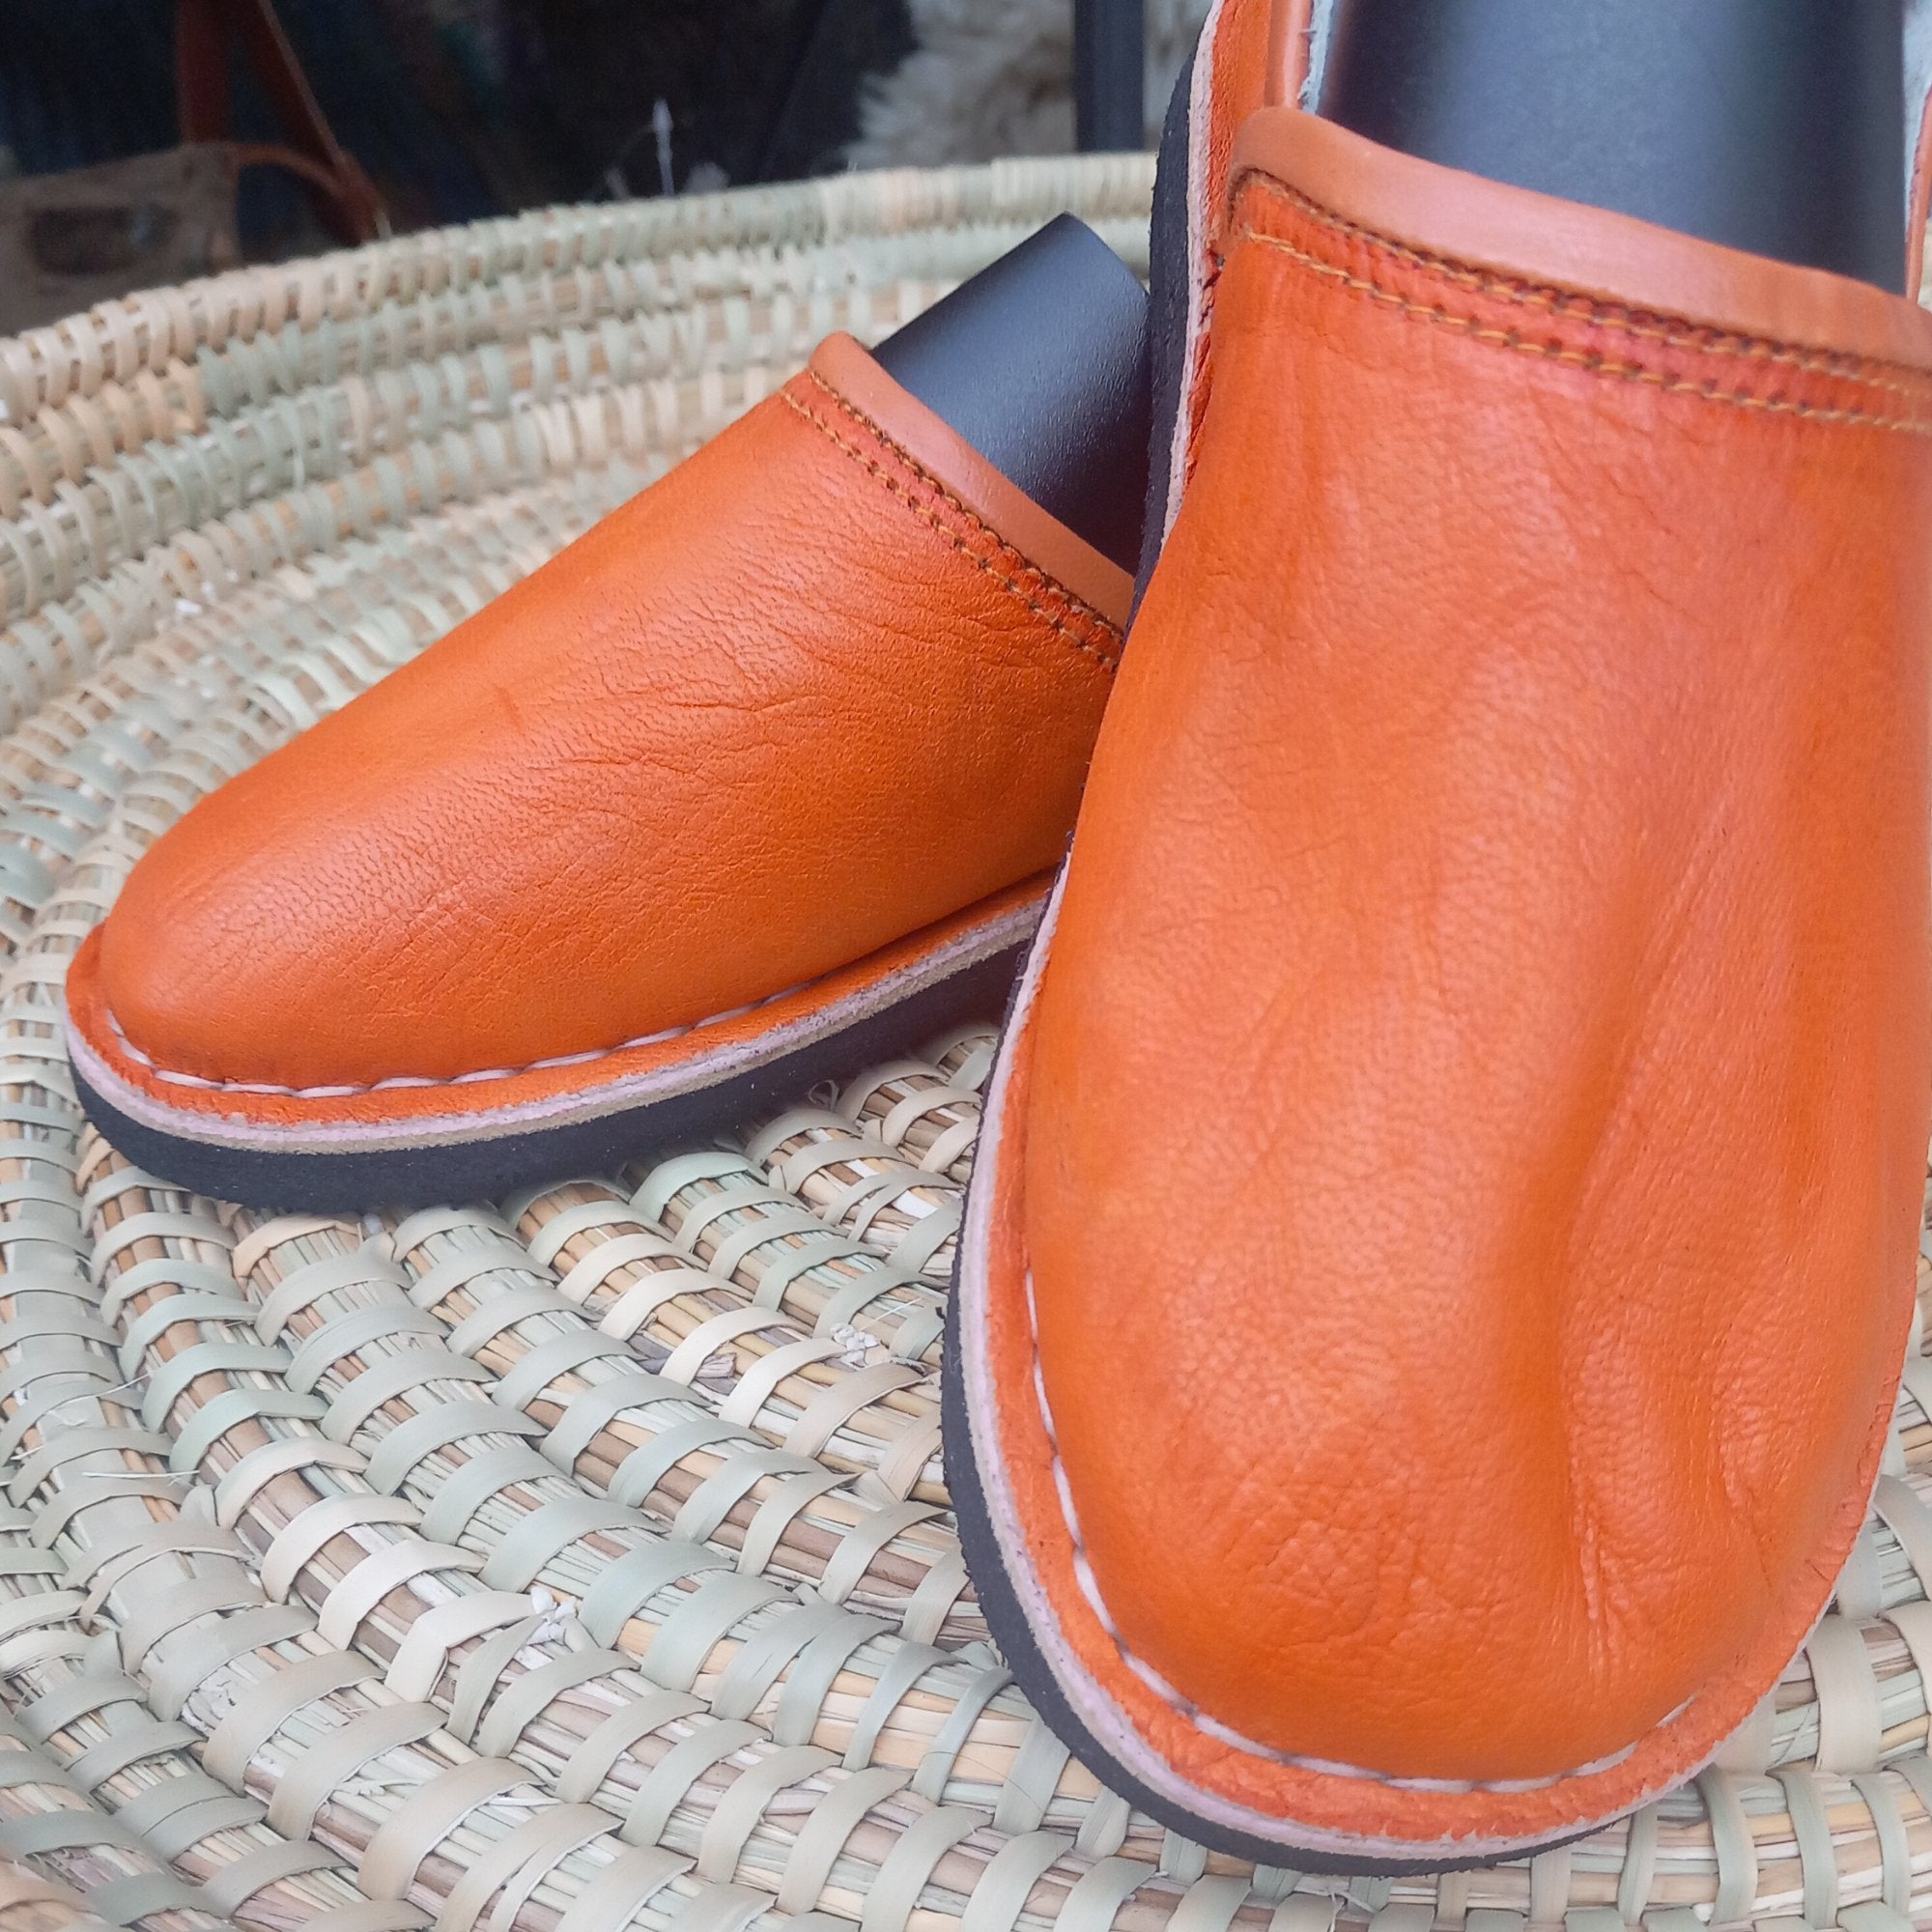 Children's Leather Shoes - Artisan Stories